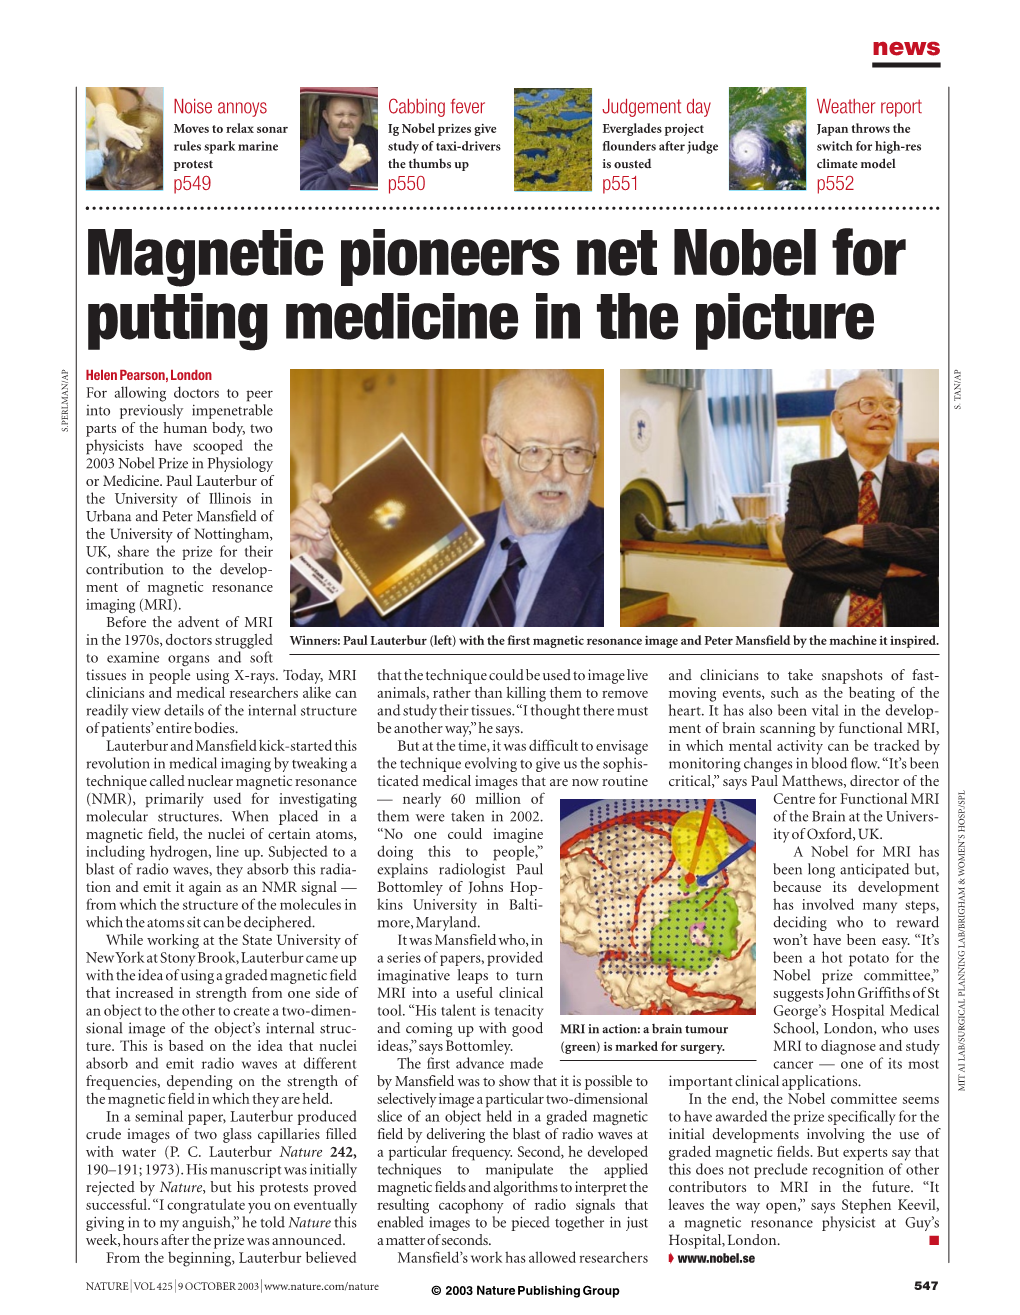 Magnetic Pioneers Net Nobel for Putting Medicine in the Picture